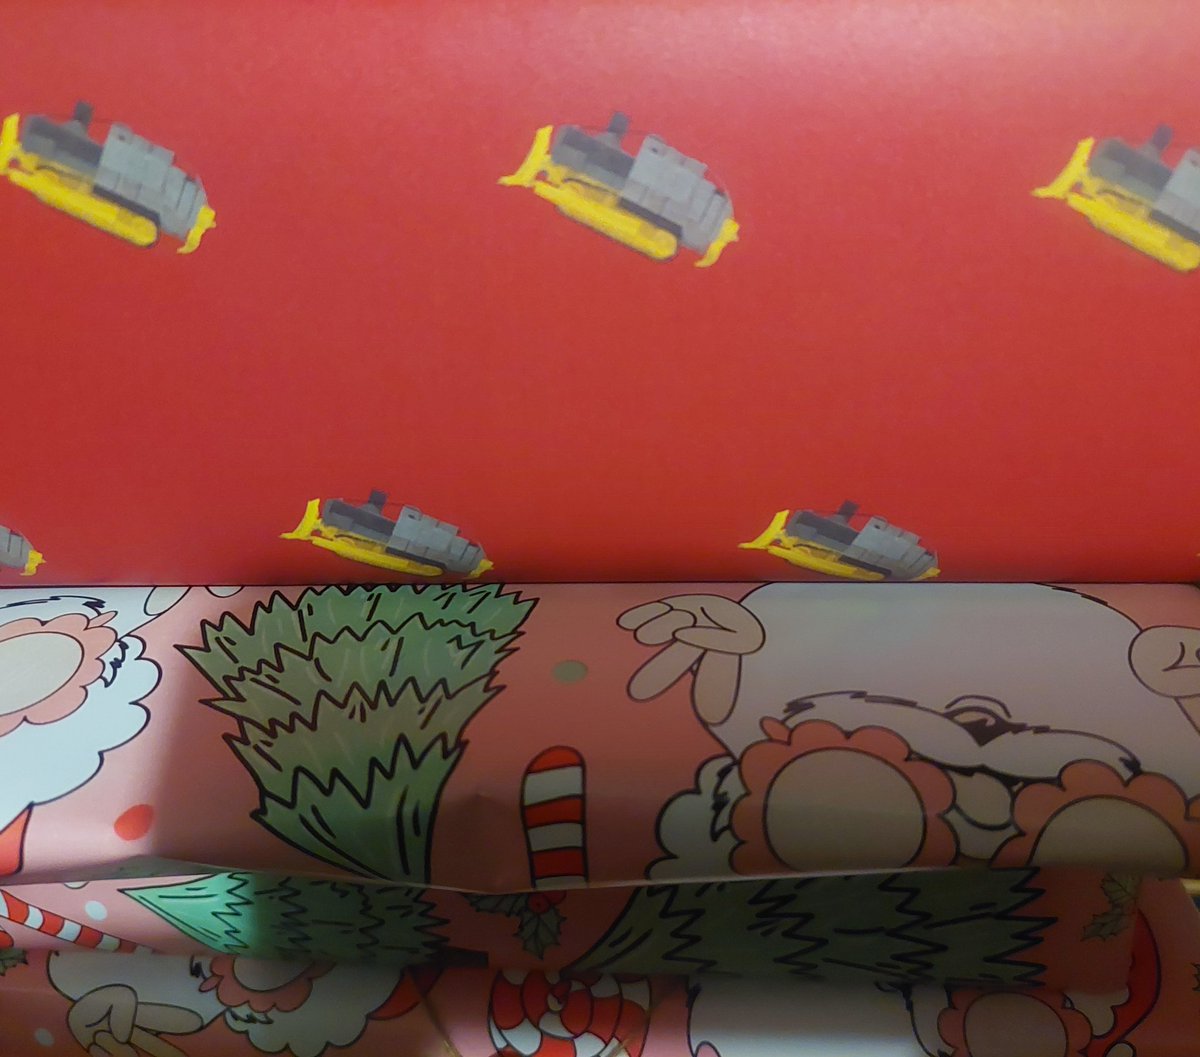 I bought killdozer wrapping paper for Christmas last year, and it was probably the best purchase that I ever made in my entire life.